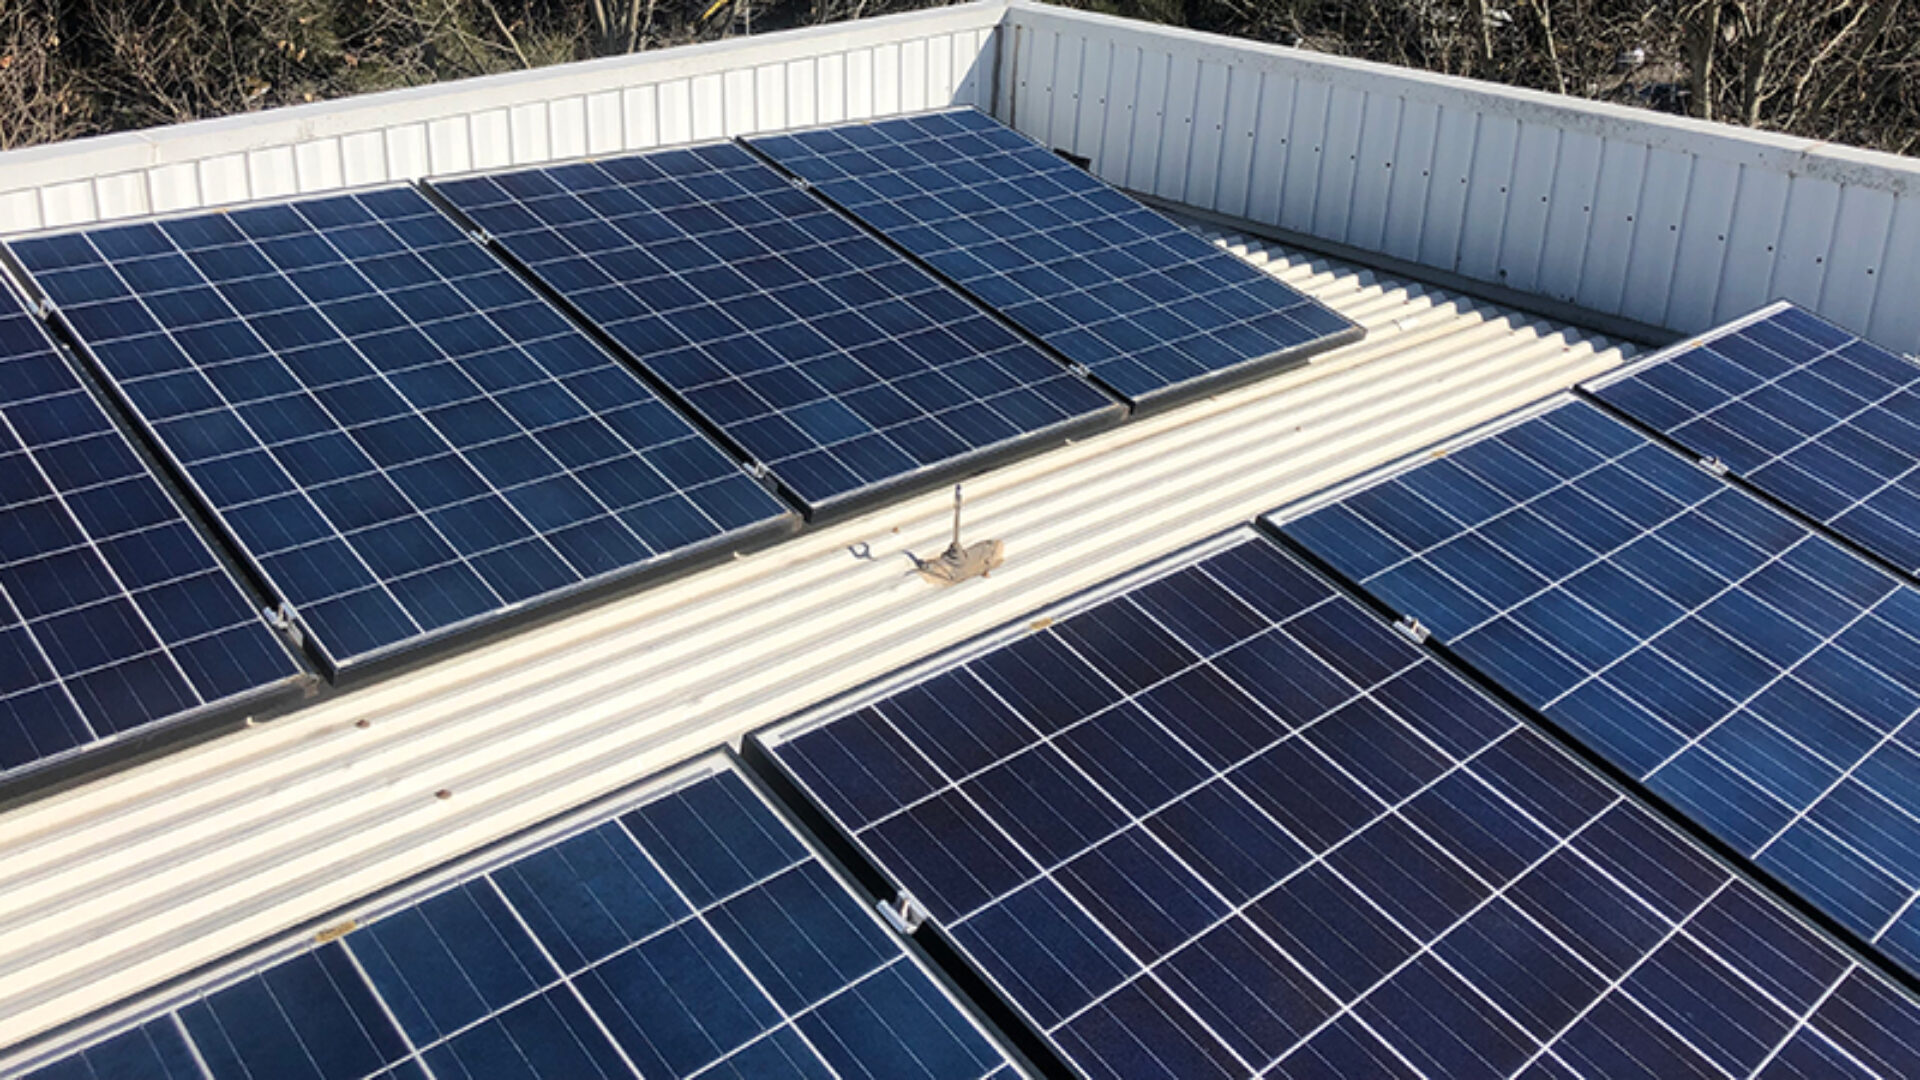 Solar panels installed on a metal roof